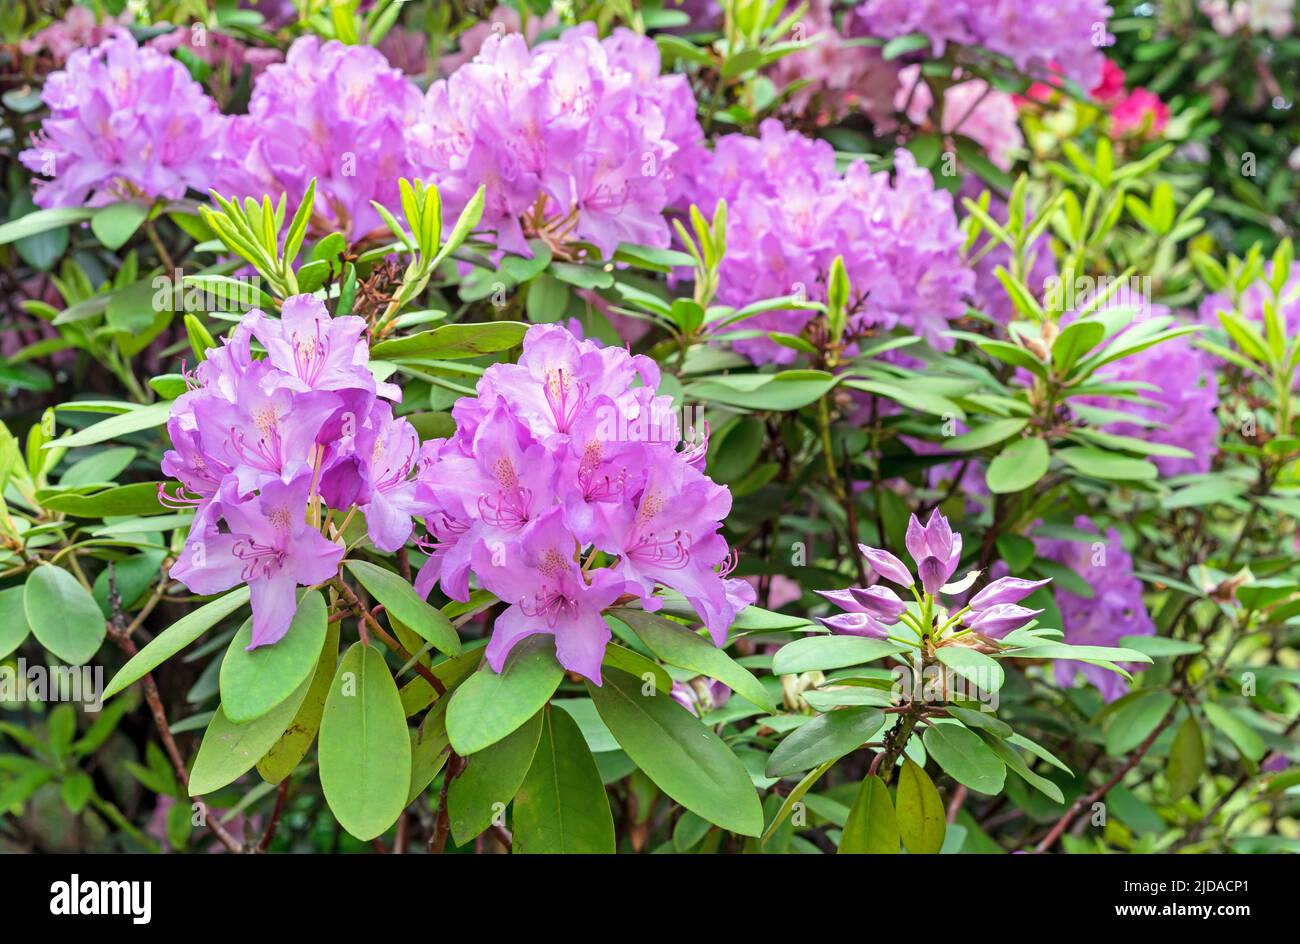 Pacific Rhododendron. Lilac California rhododendron. Blooming rhododendrons in the summer garden. Stock Photo